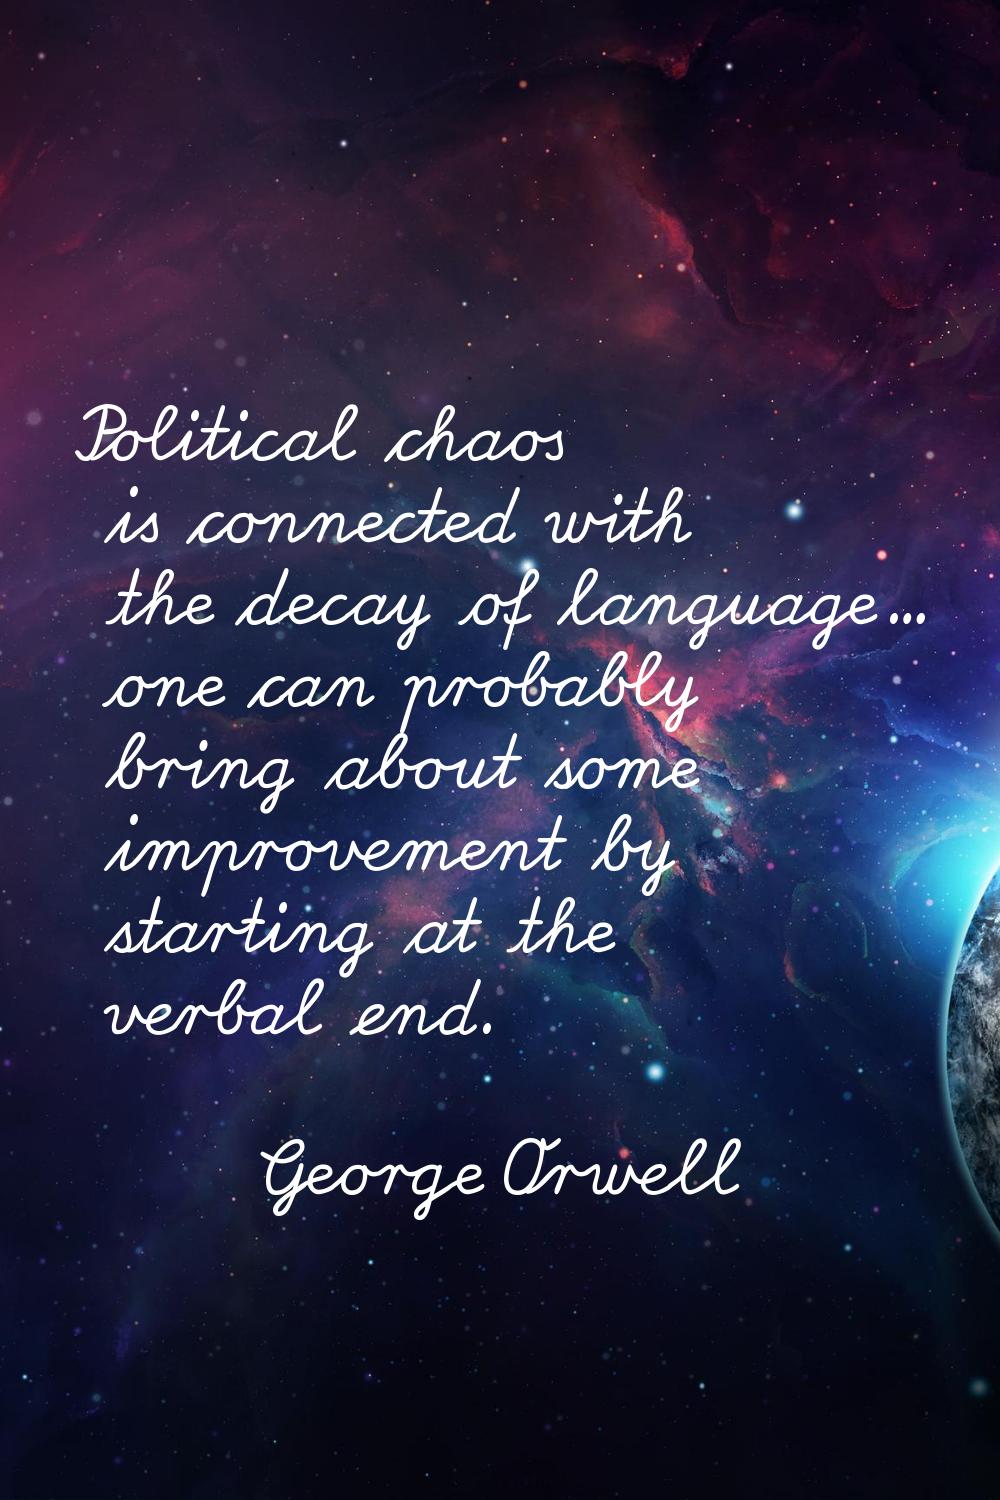 Political chaos is connected with the decay of language... one can probably bring about some improv